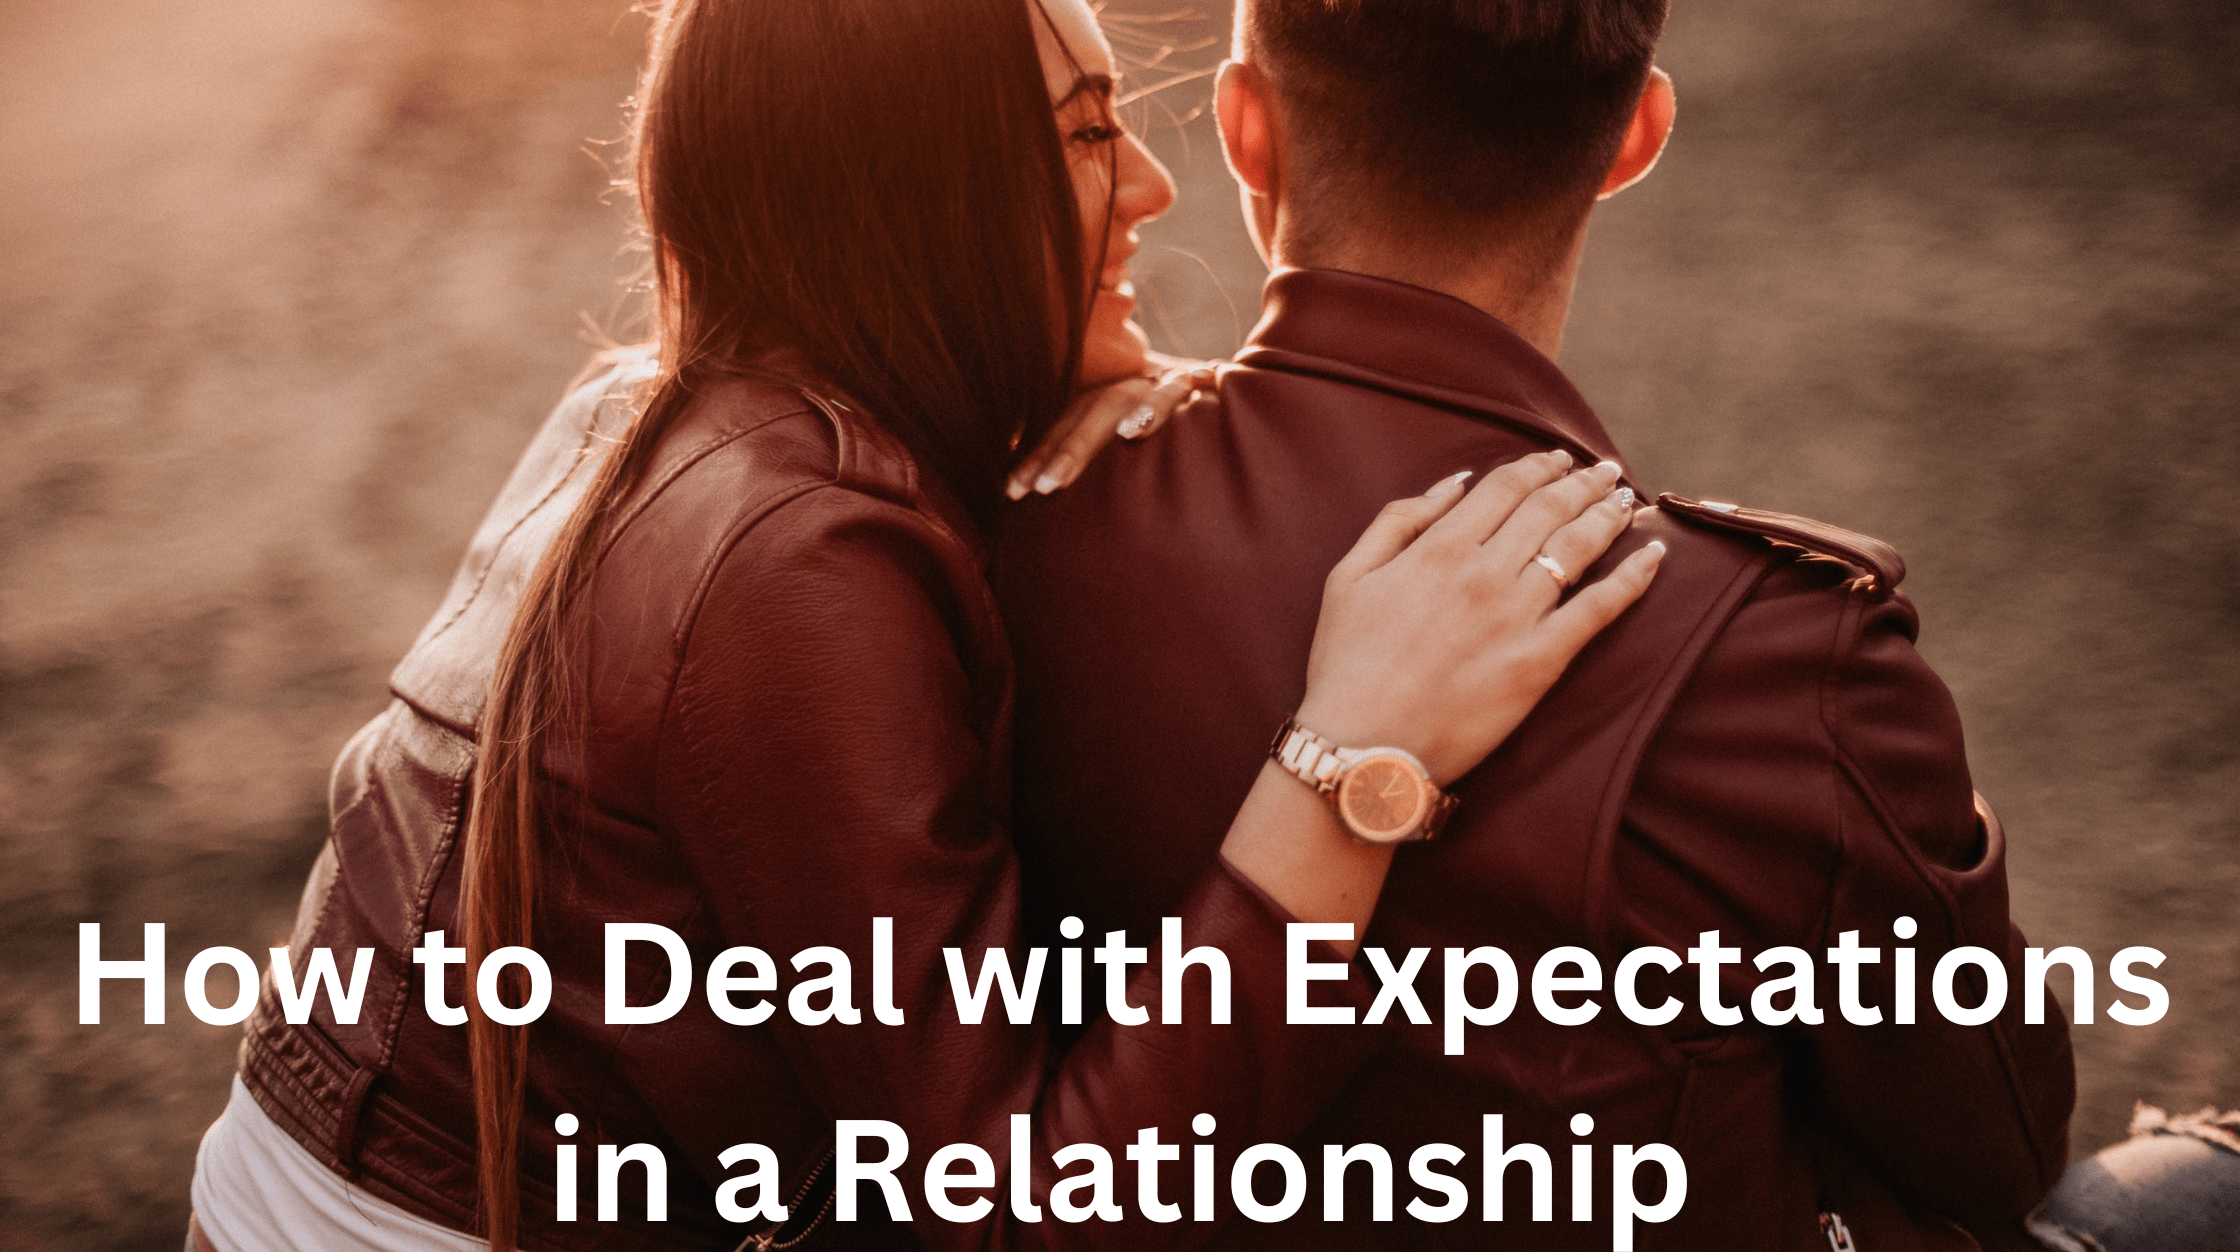 How to Deal with Expectations in a Relationship 19